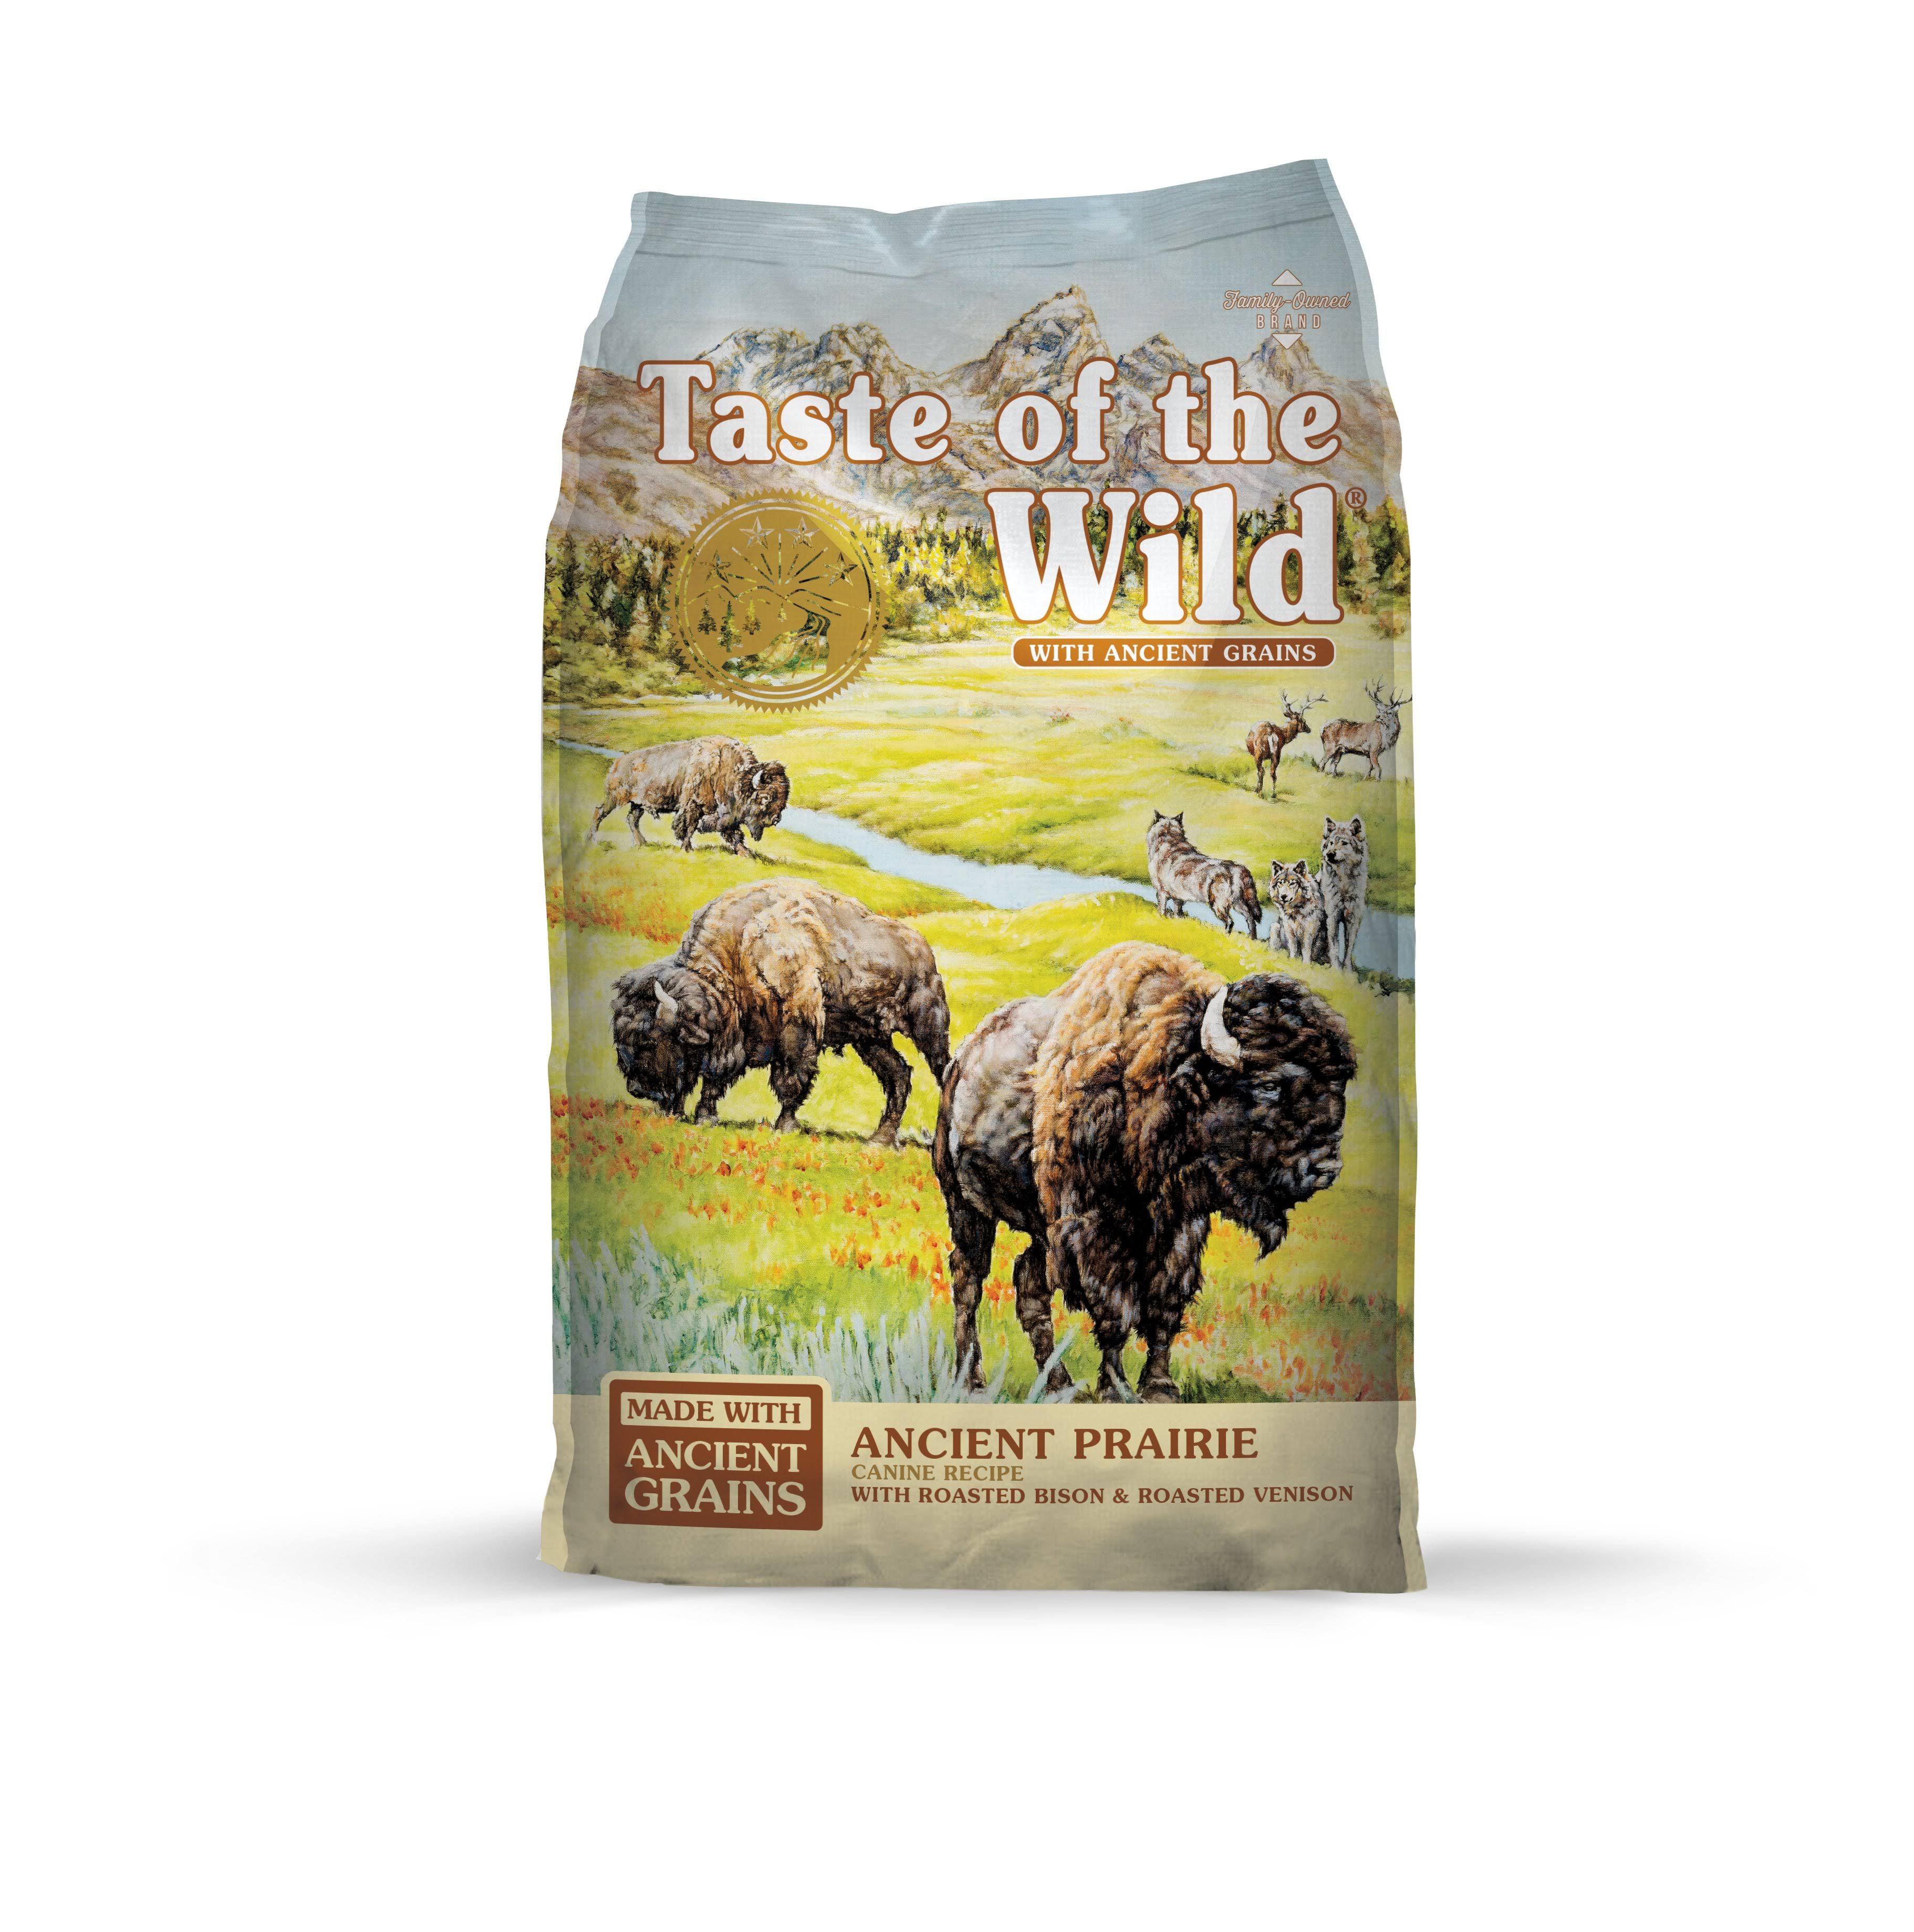 Taste of The Wild with Ancient Grains, Ancient Prairie Canine Recipe with Roasted Bison and Venison Dry Dog Food, Made with High Protein from Real